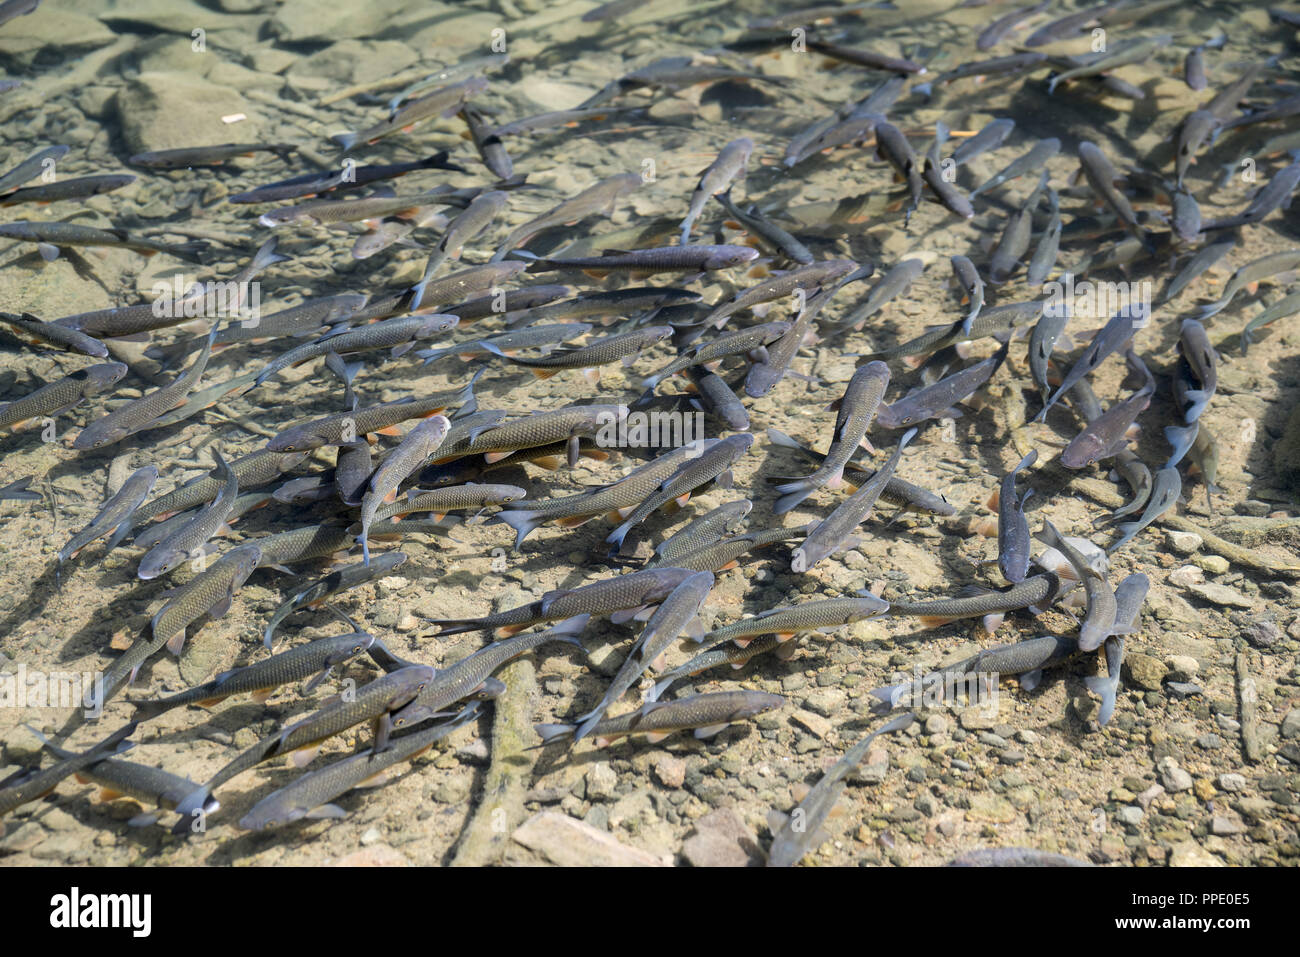 A small school of trout in a mountain lake in Slovakia. Stock Photo